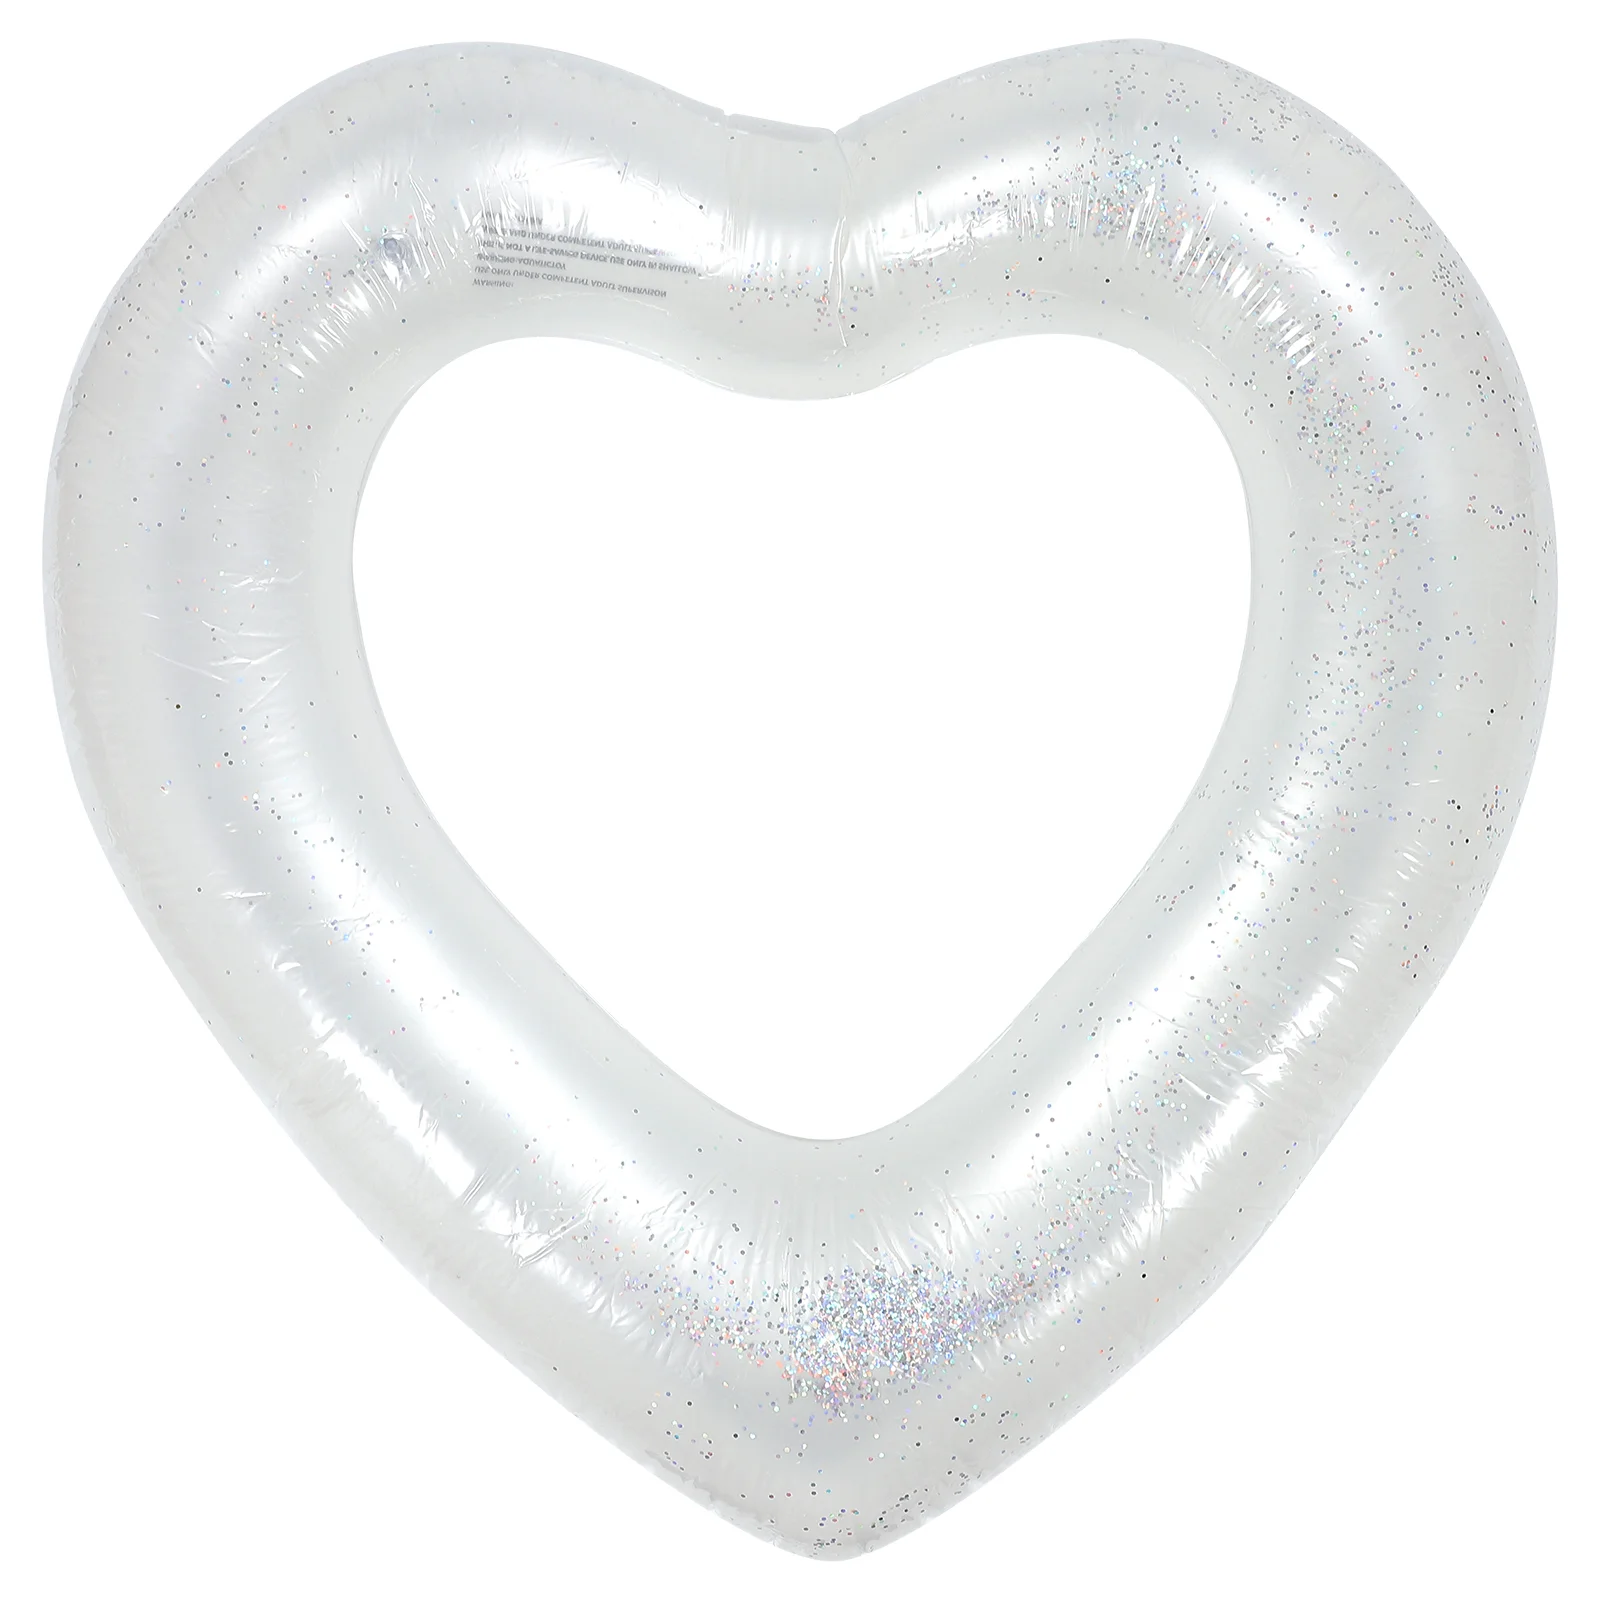 Swim Ring Heart Shaped Pool Floats Swimming Pool Float Tube Beach Water Fun Party for Kids Adults